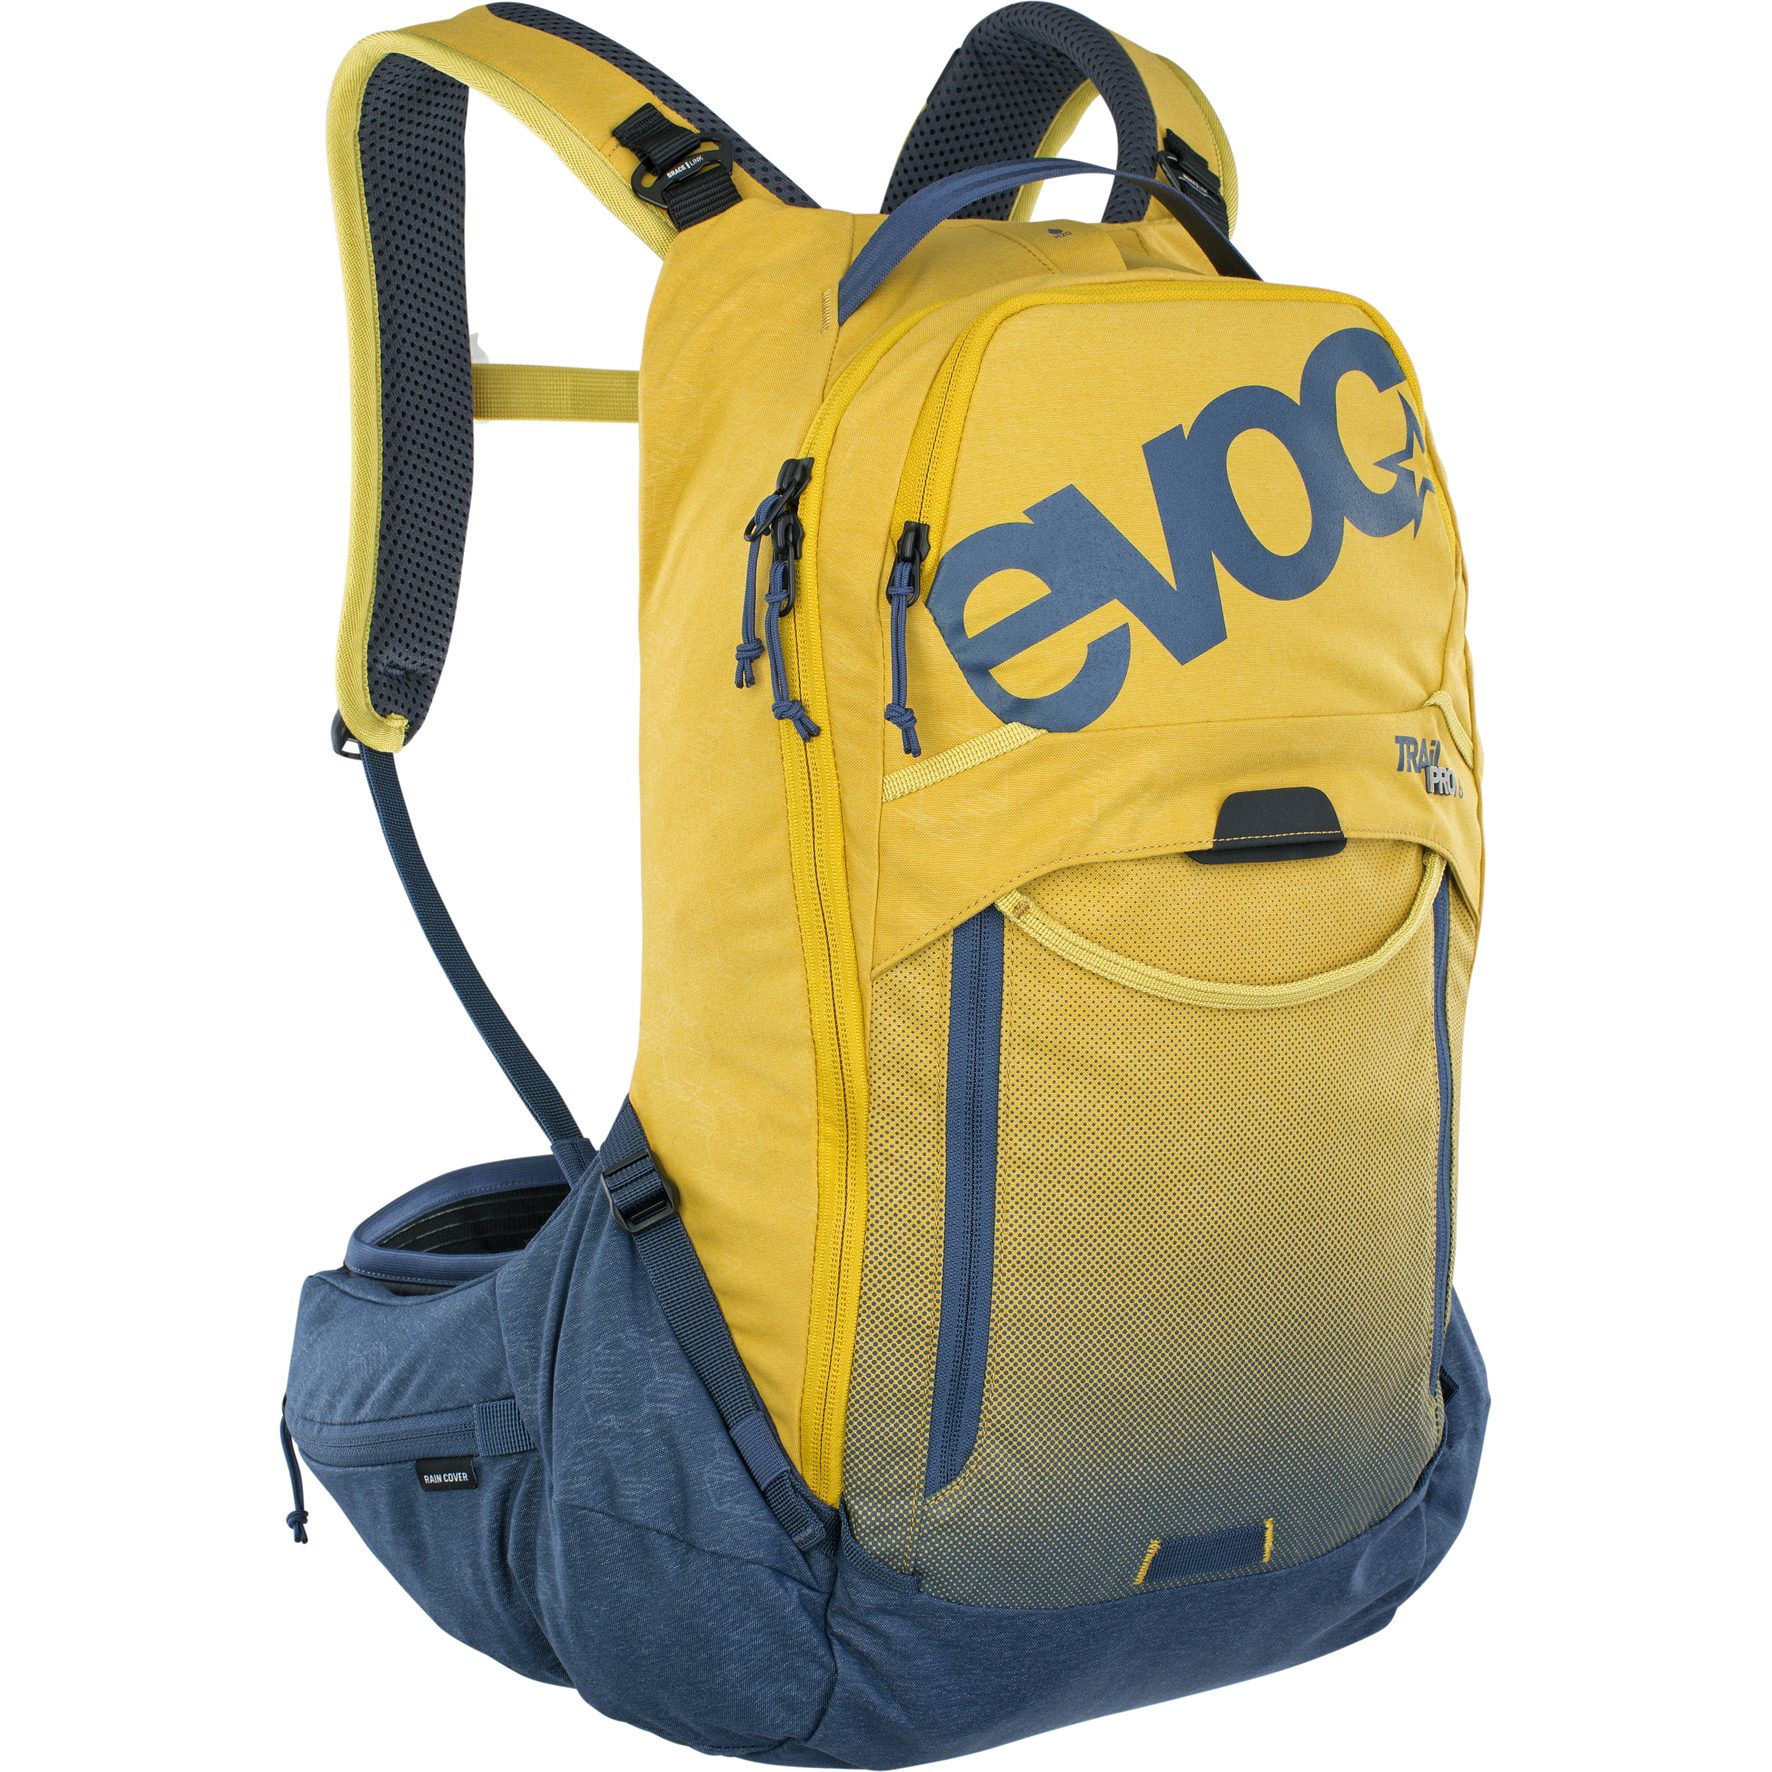 Picture of EVOC Trail Pro 26L Protector Backpack - Curry/Denim